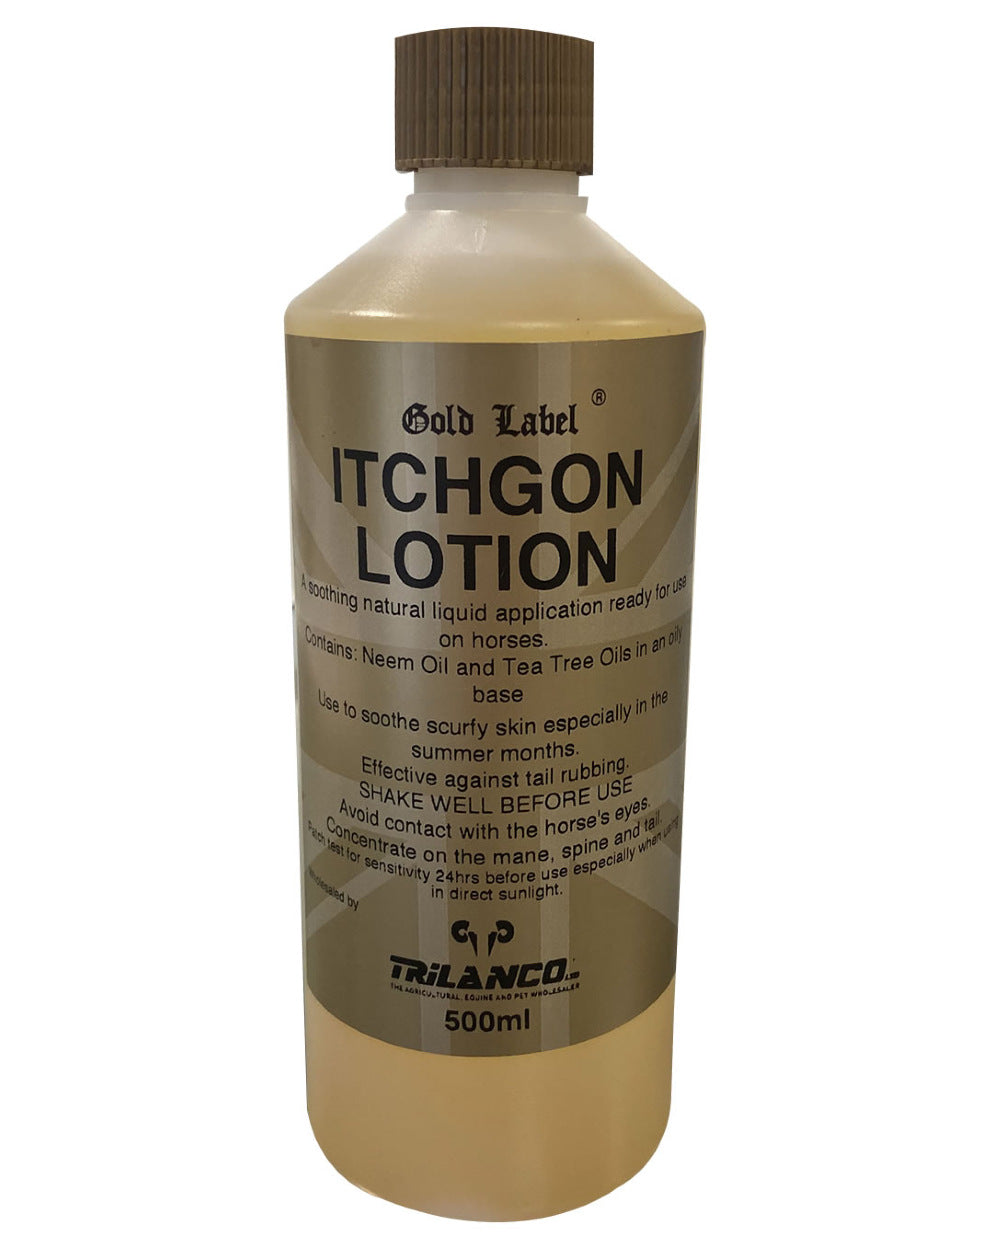 Gold Label Itchgon Lotion On A White Background